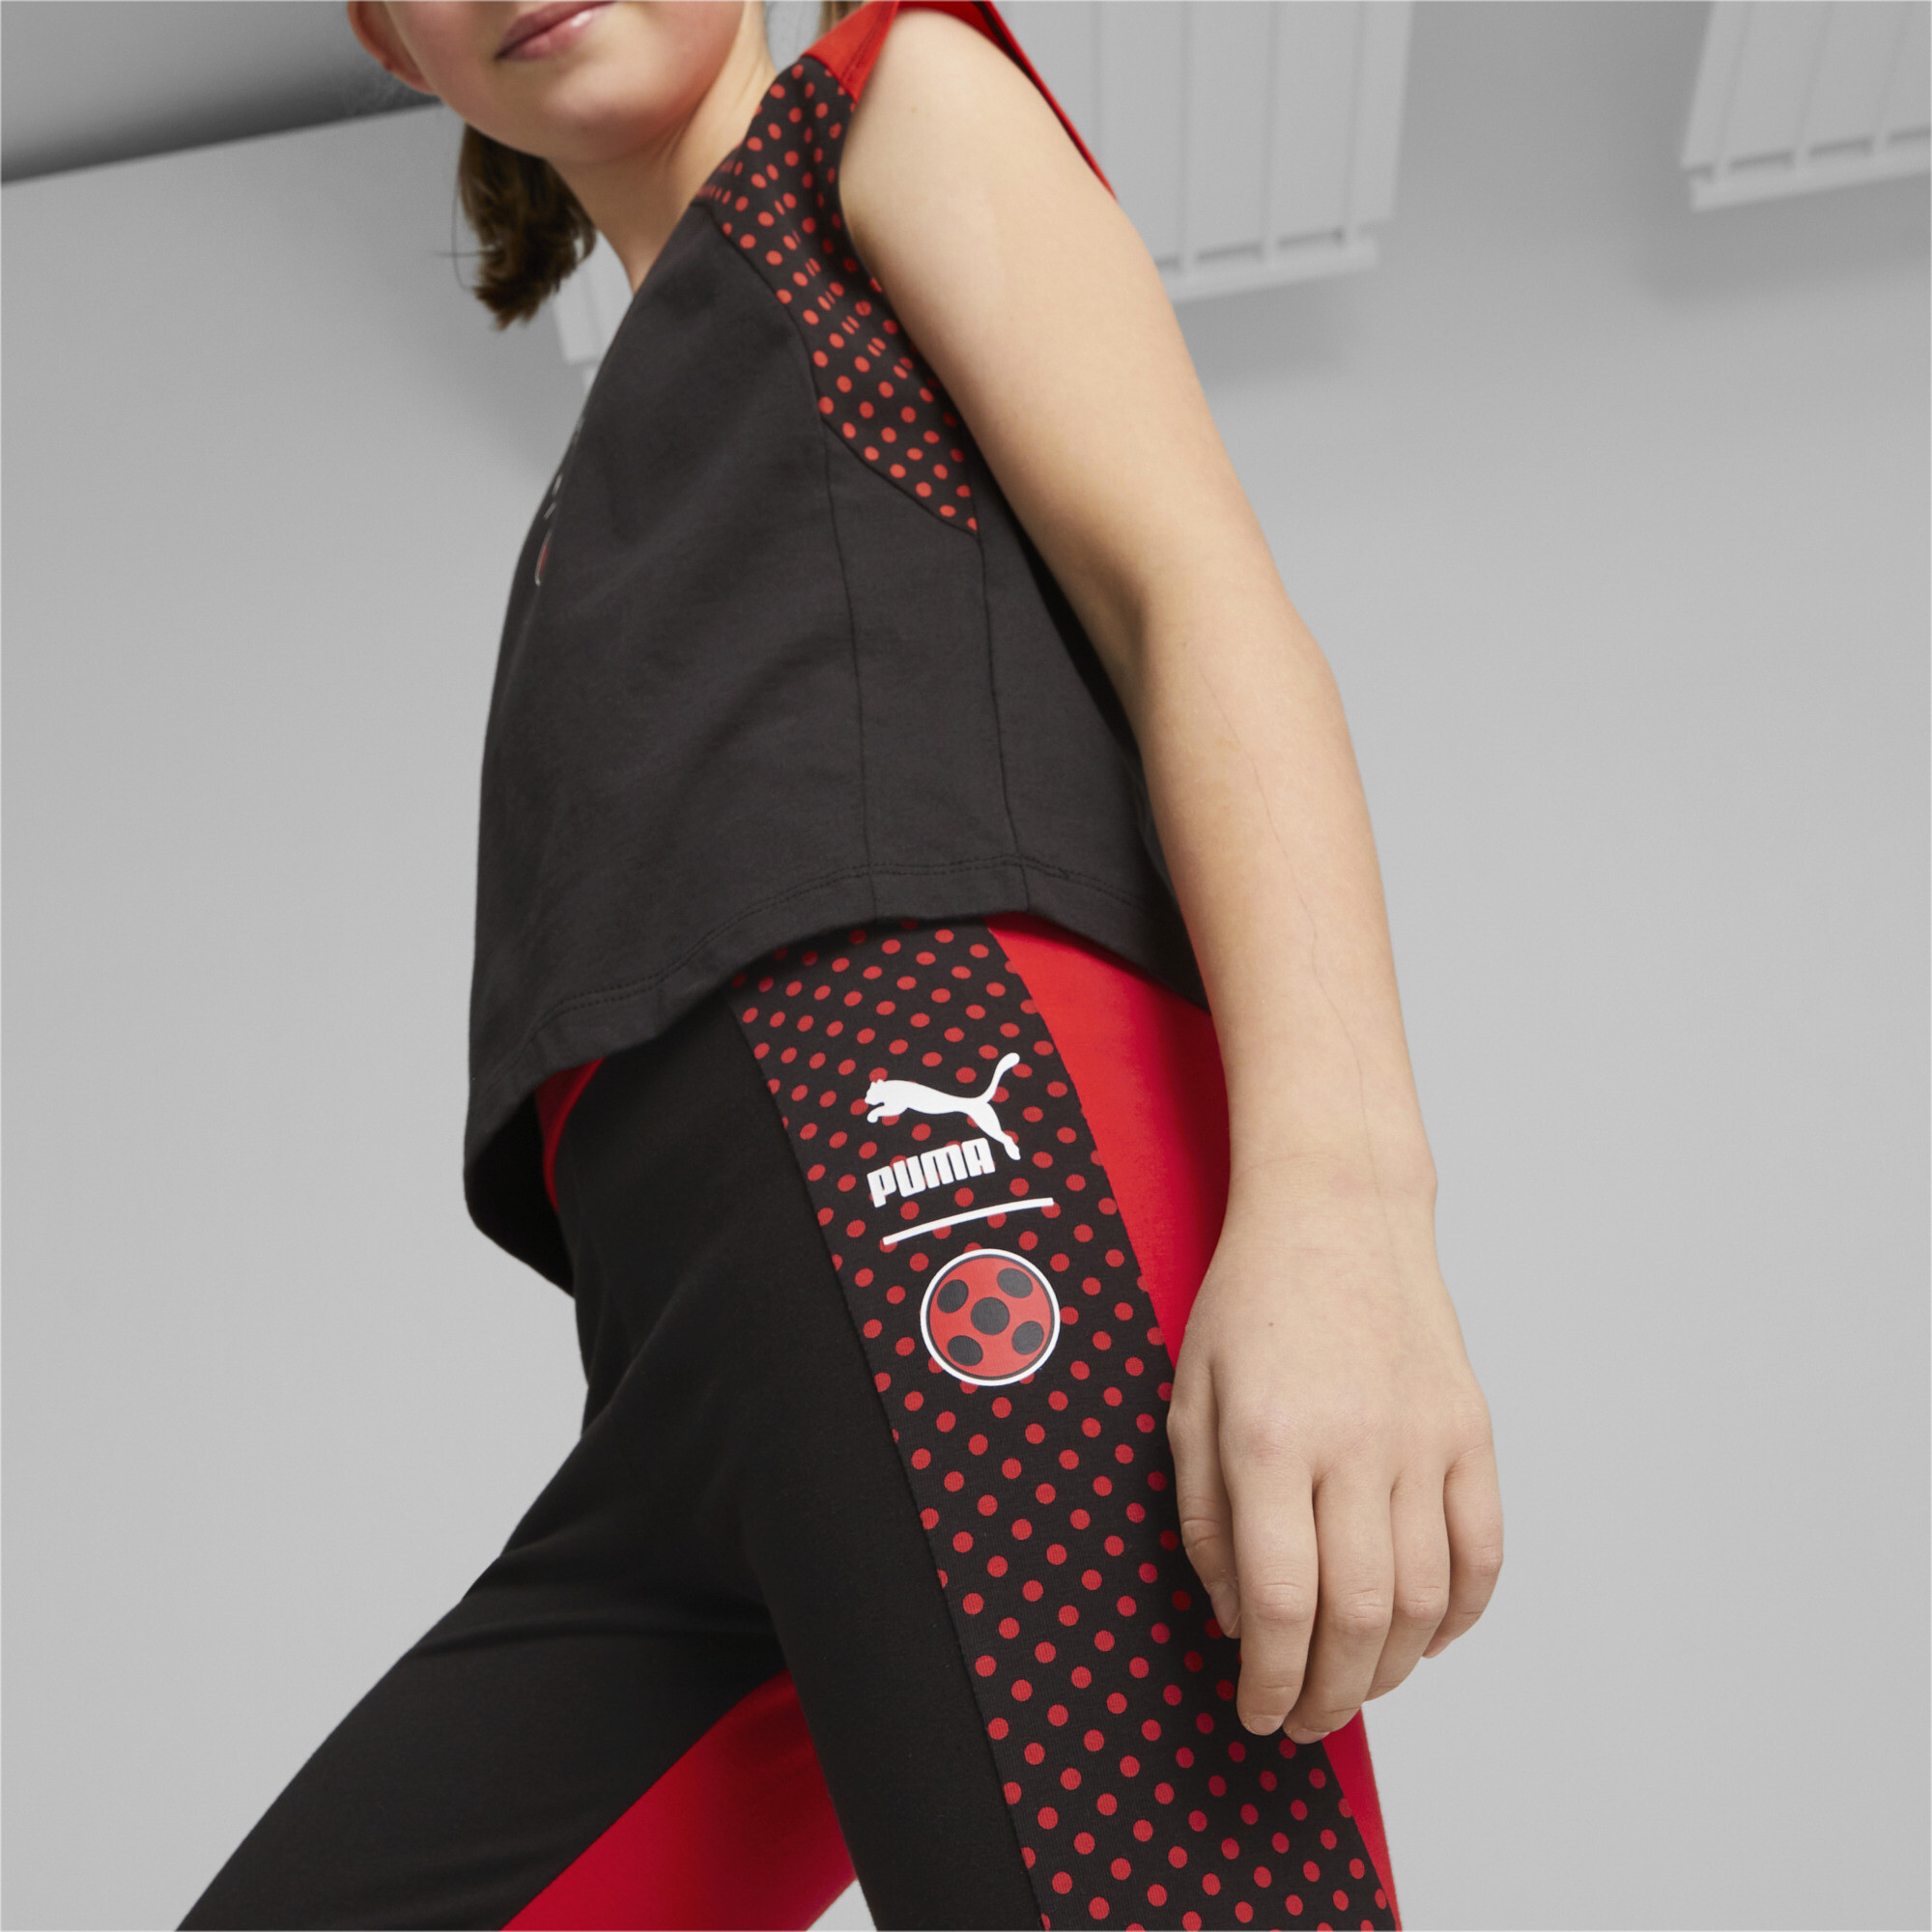 PUMA X MIRACULOUS Leggings In Black, Size 13-14 Youth